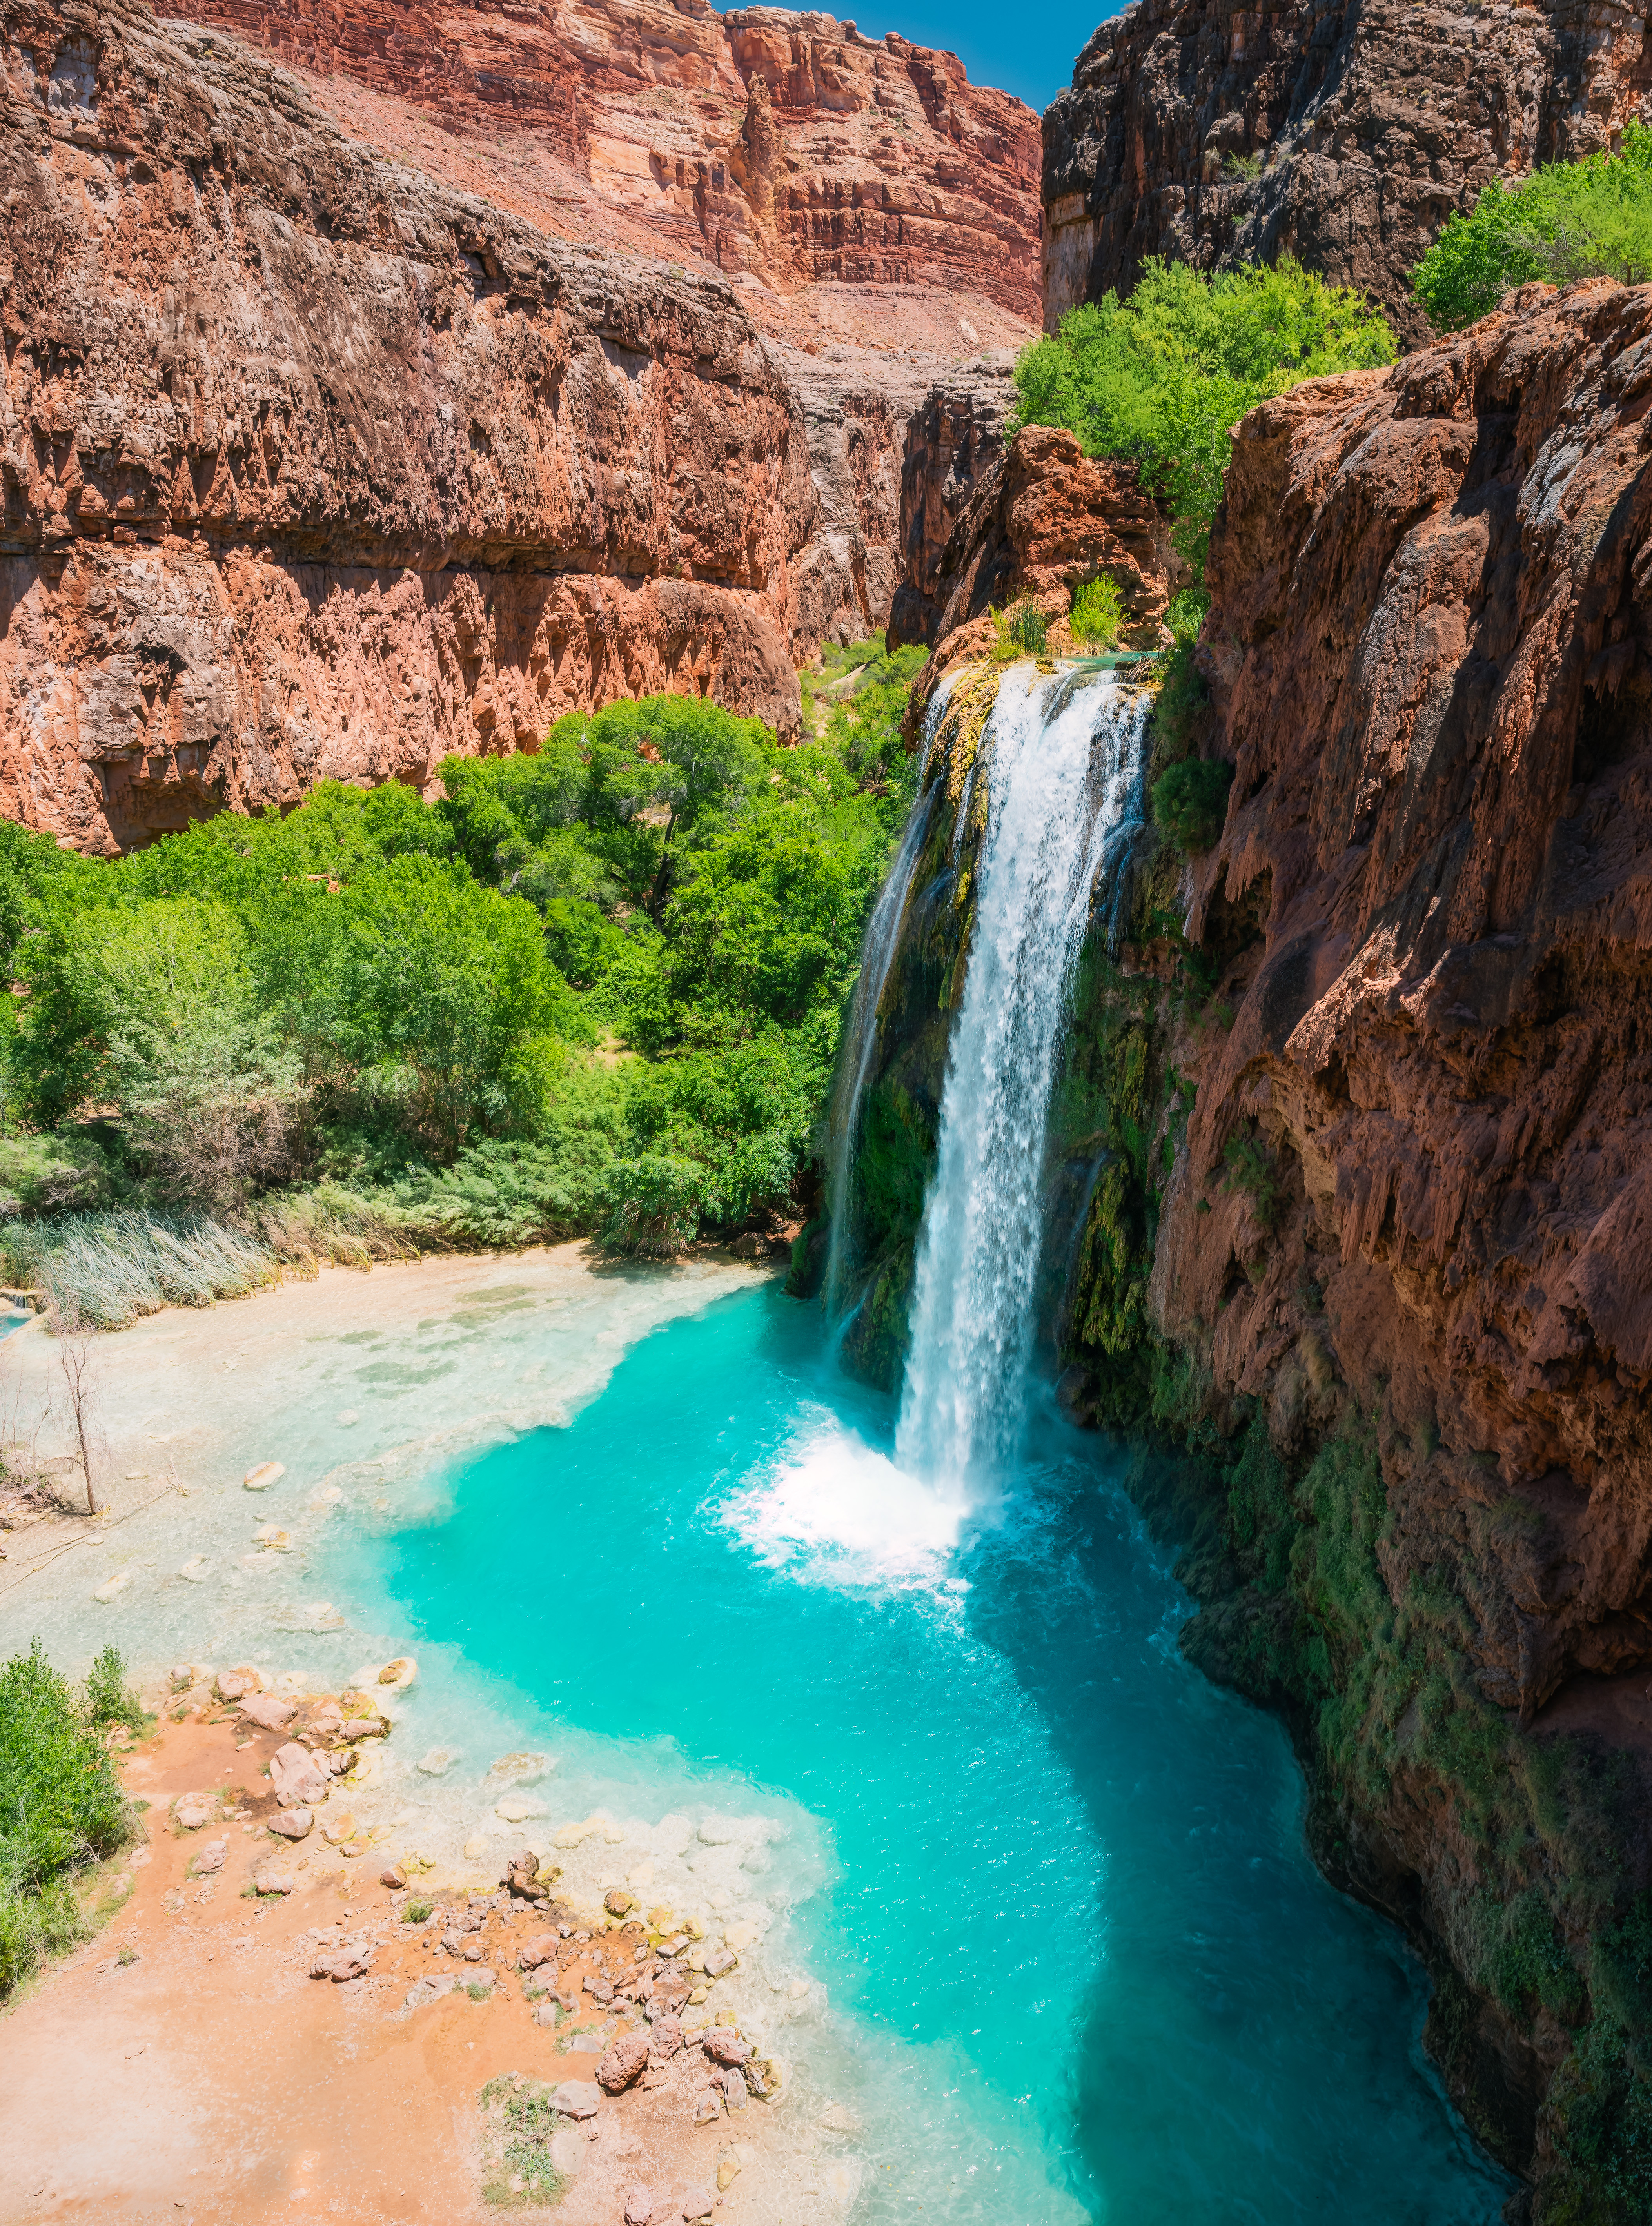 View of Havasu Falls from the trail